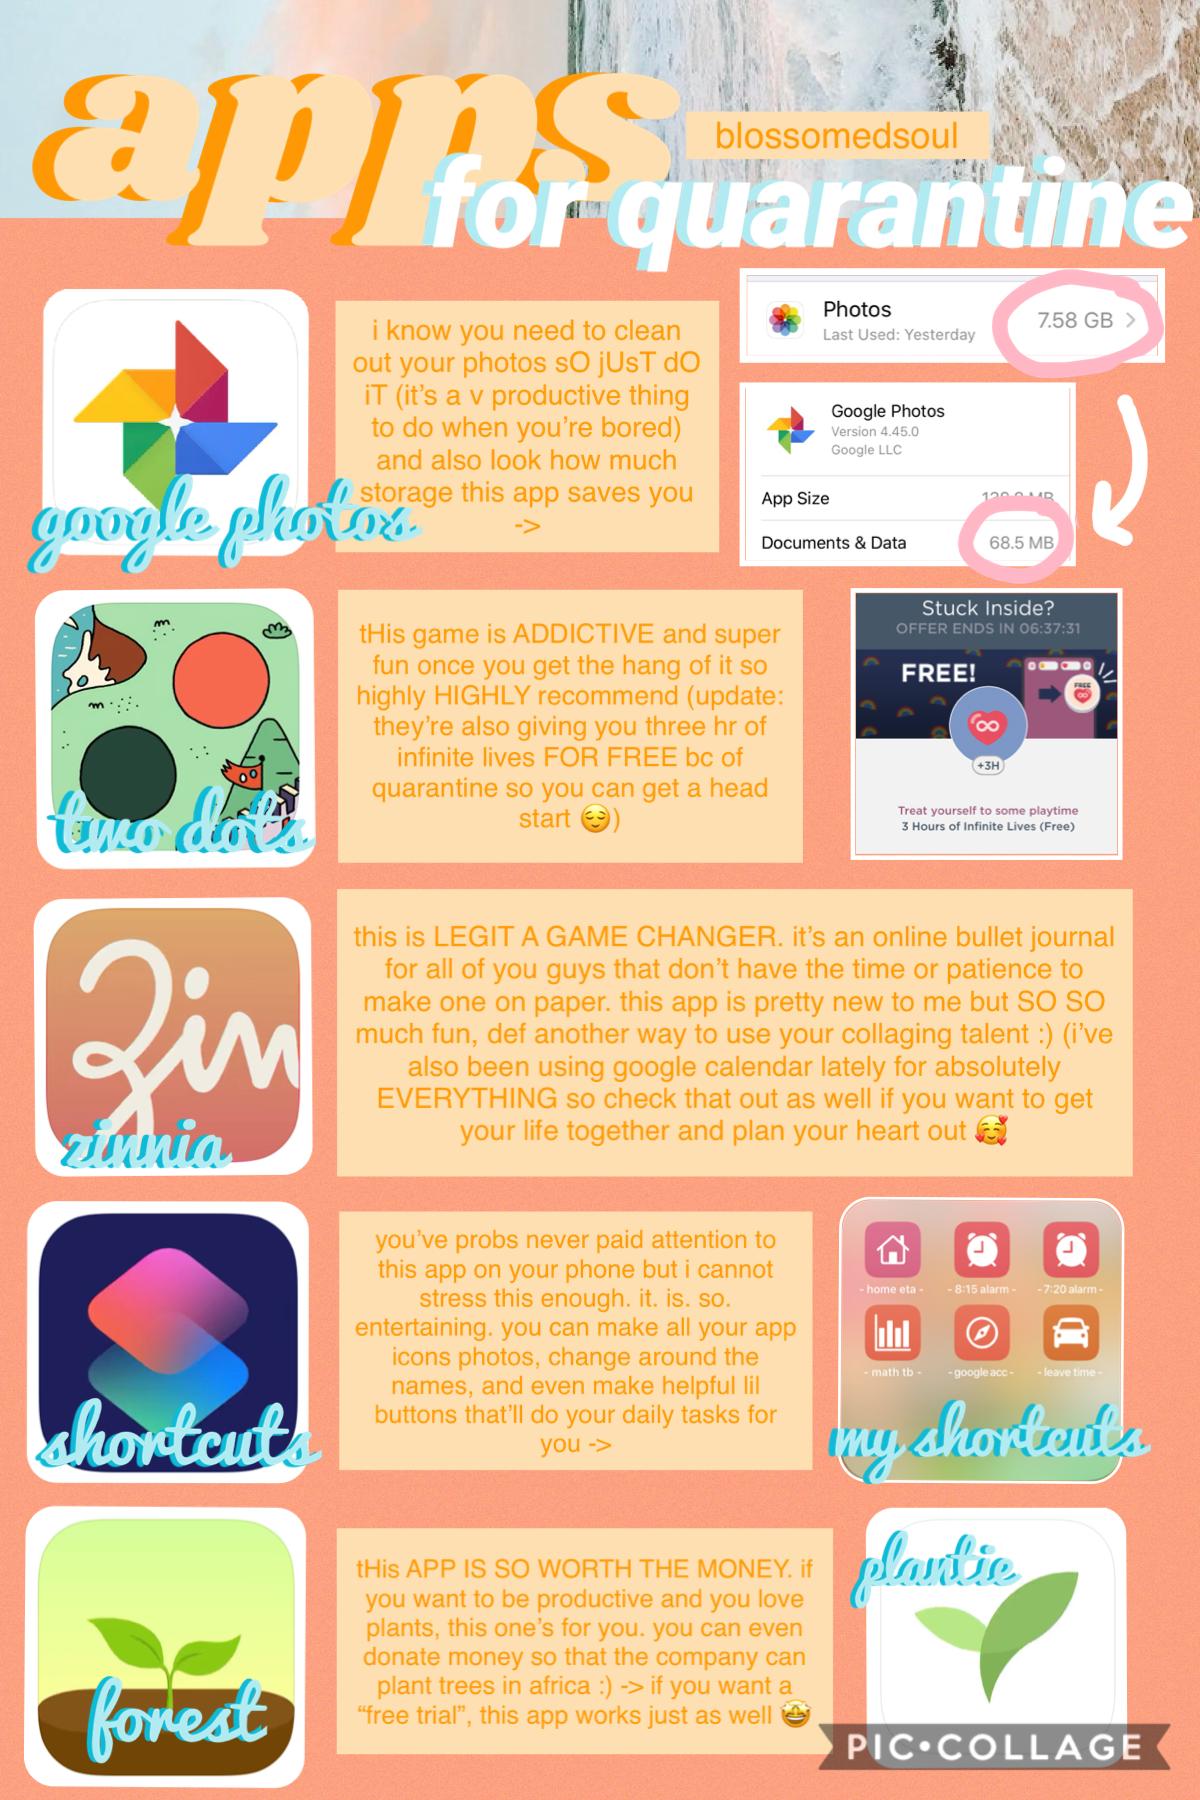 just some app recs if you’re really bored :) [tap]

i had a lot of fun making this haha (also i’m on level 286 for two dots hehe fight me) 🤪❤️